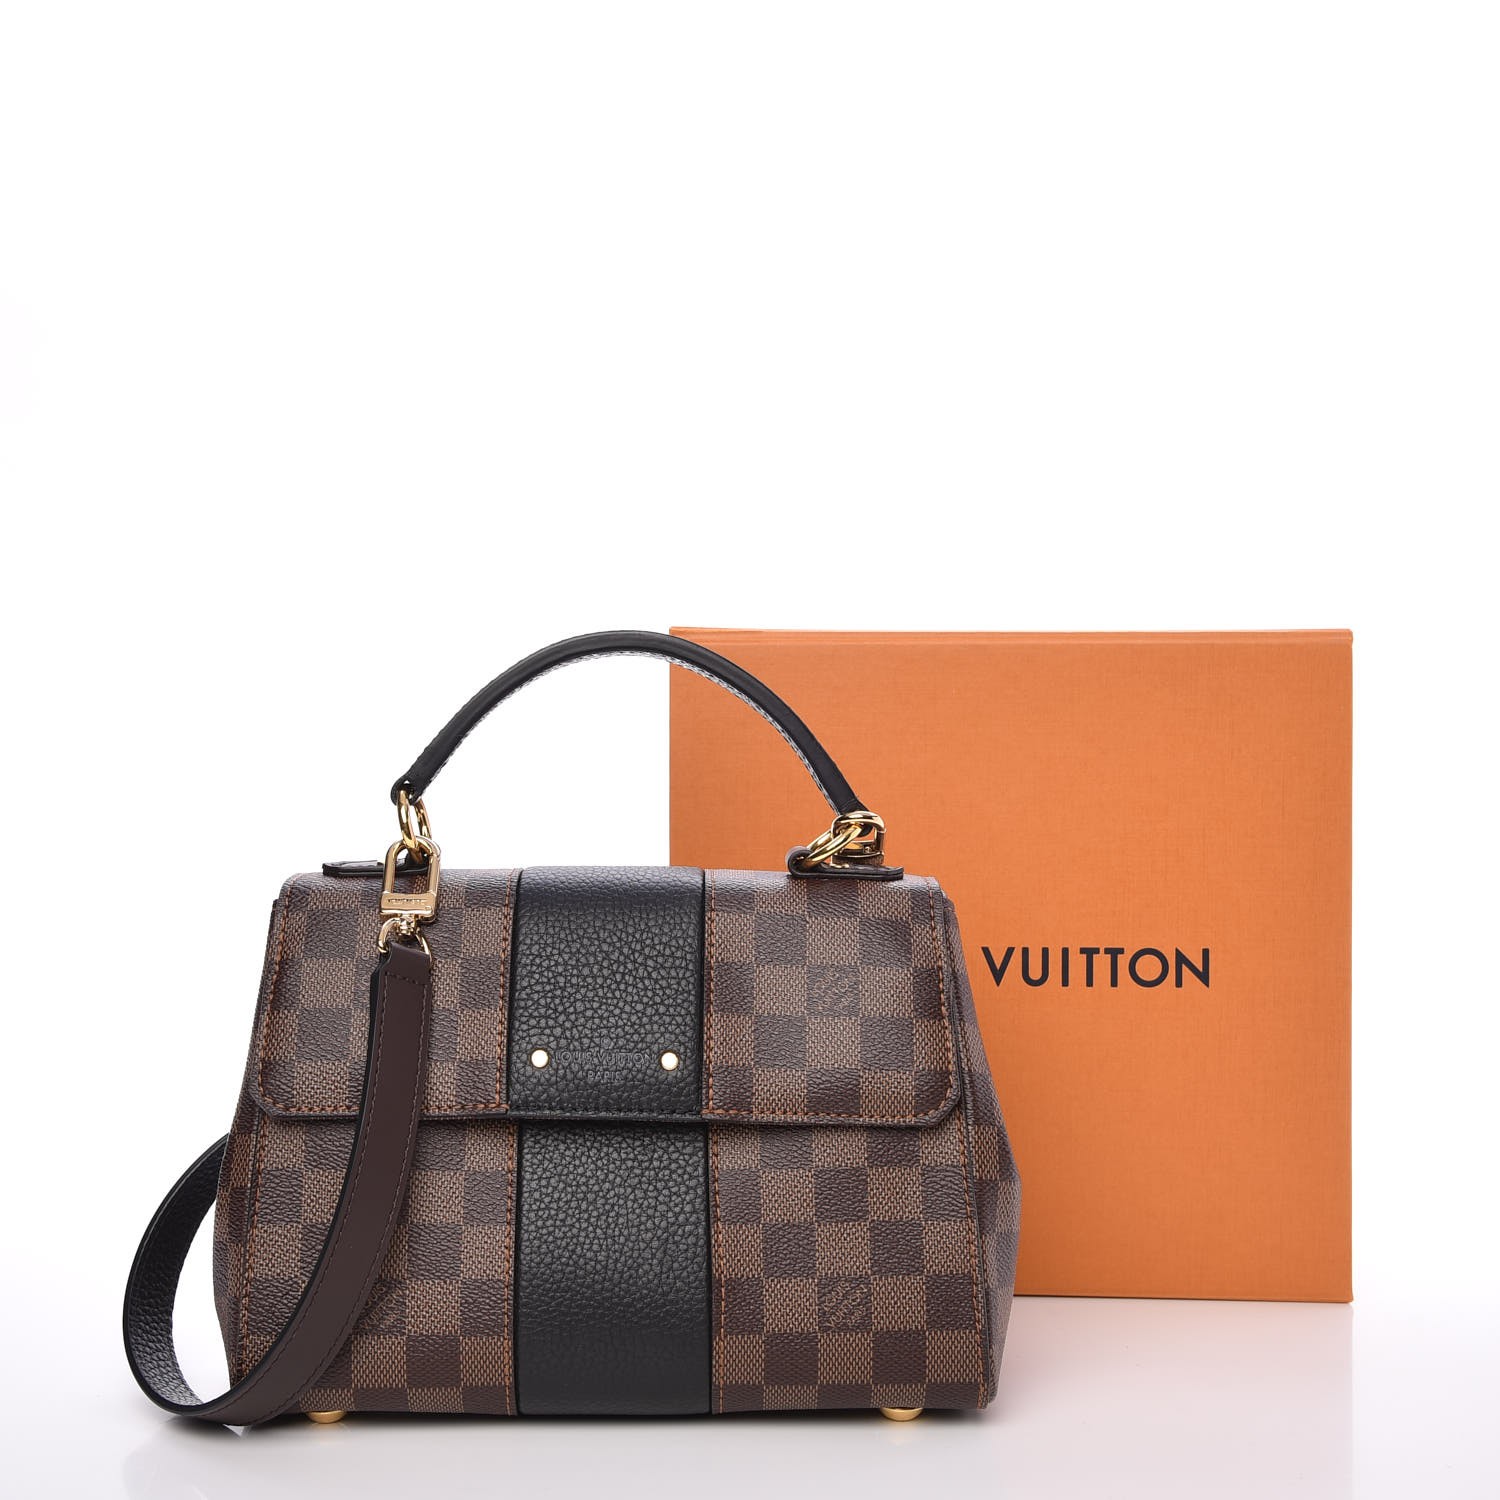 Love this great classic Louis Vuitton Damier Riverside Bag with